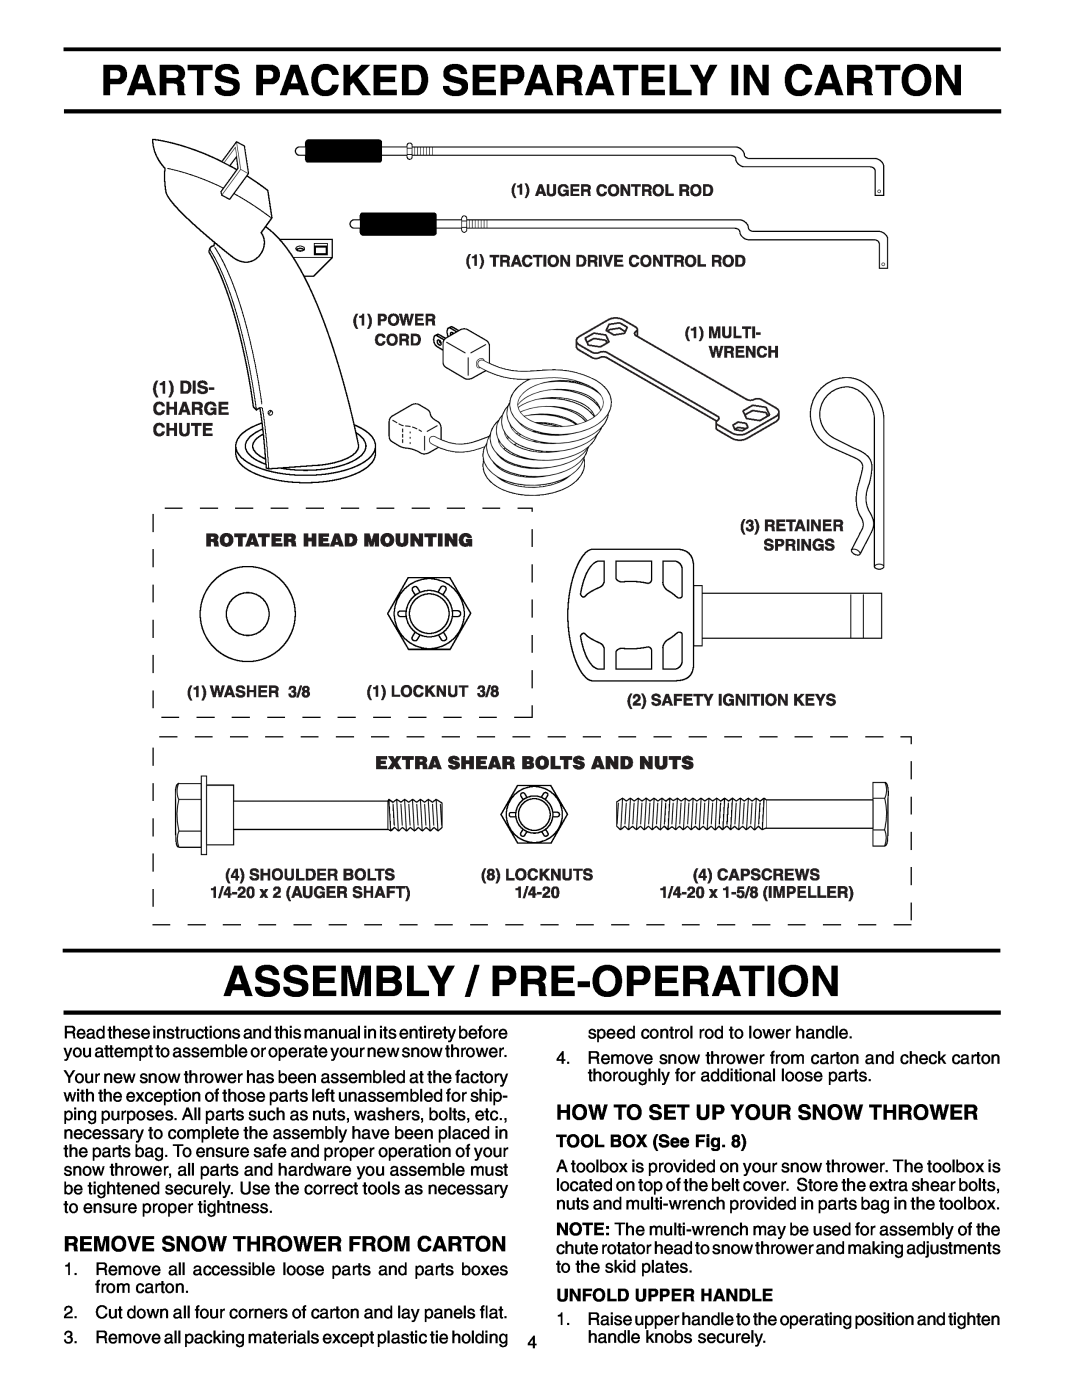 Poulan 199434 owner manual Parts Packed Separately In Carton Assembly / Pre-Operation, How To Set Up Your Snow Thrower 